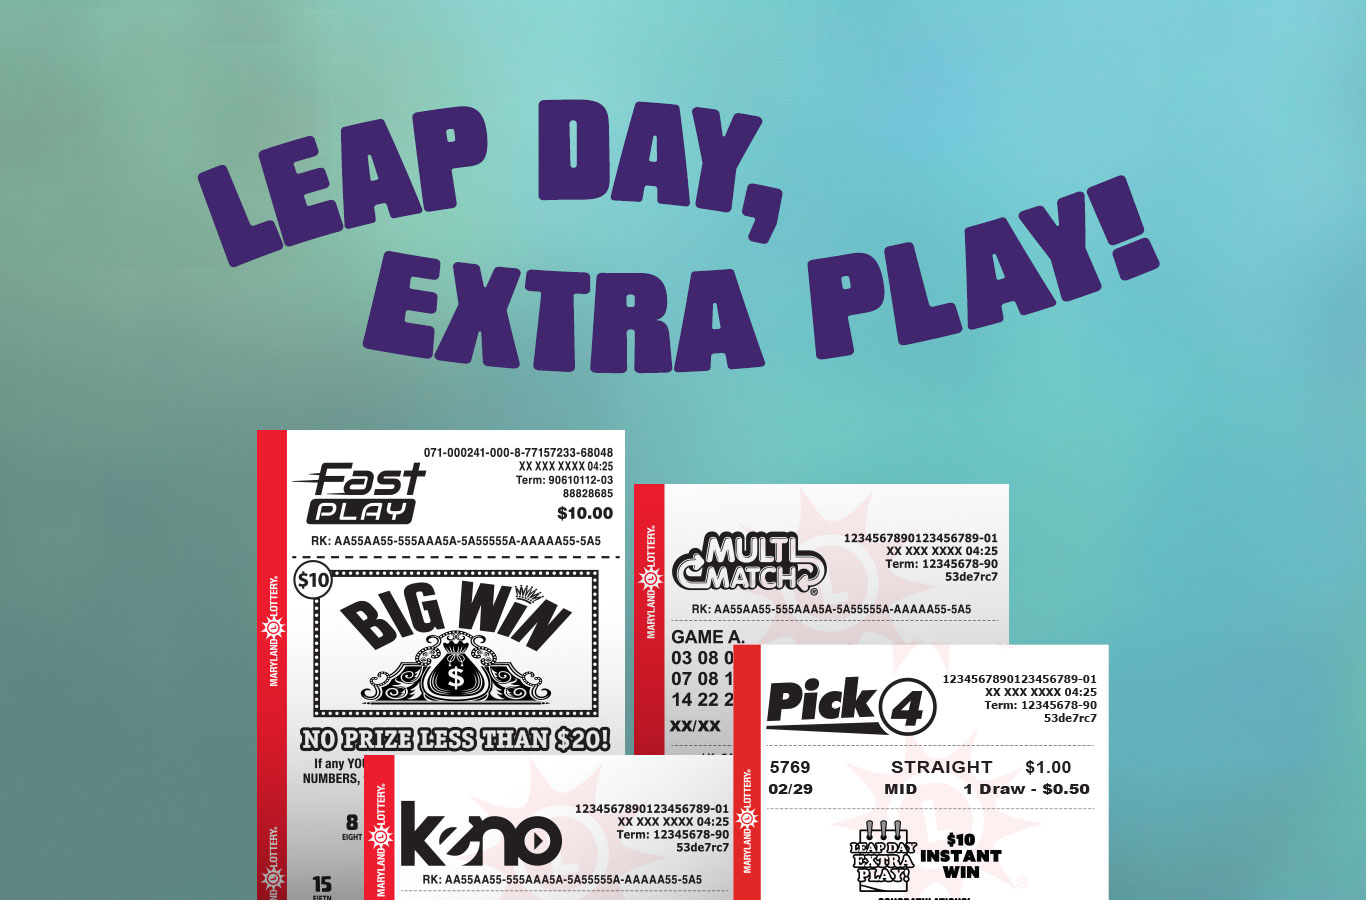 Leap Day Extra Play